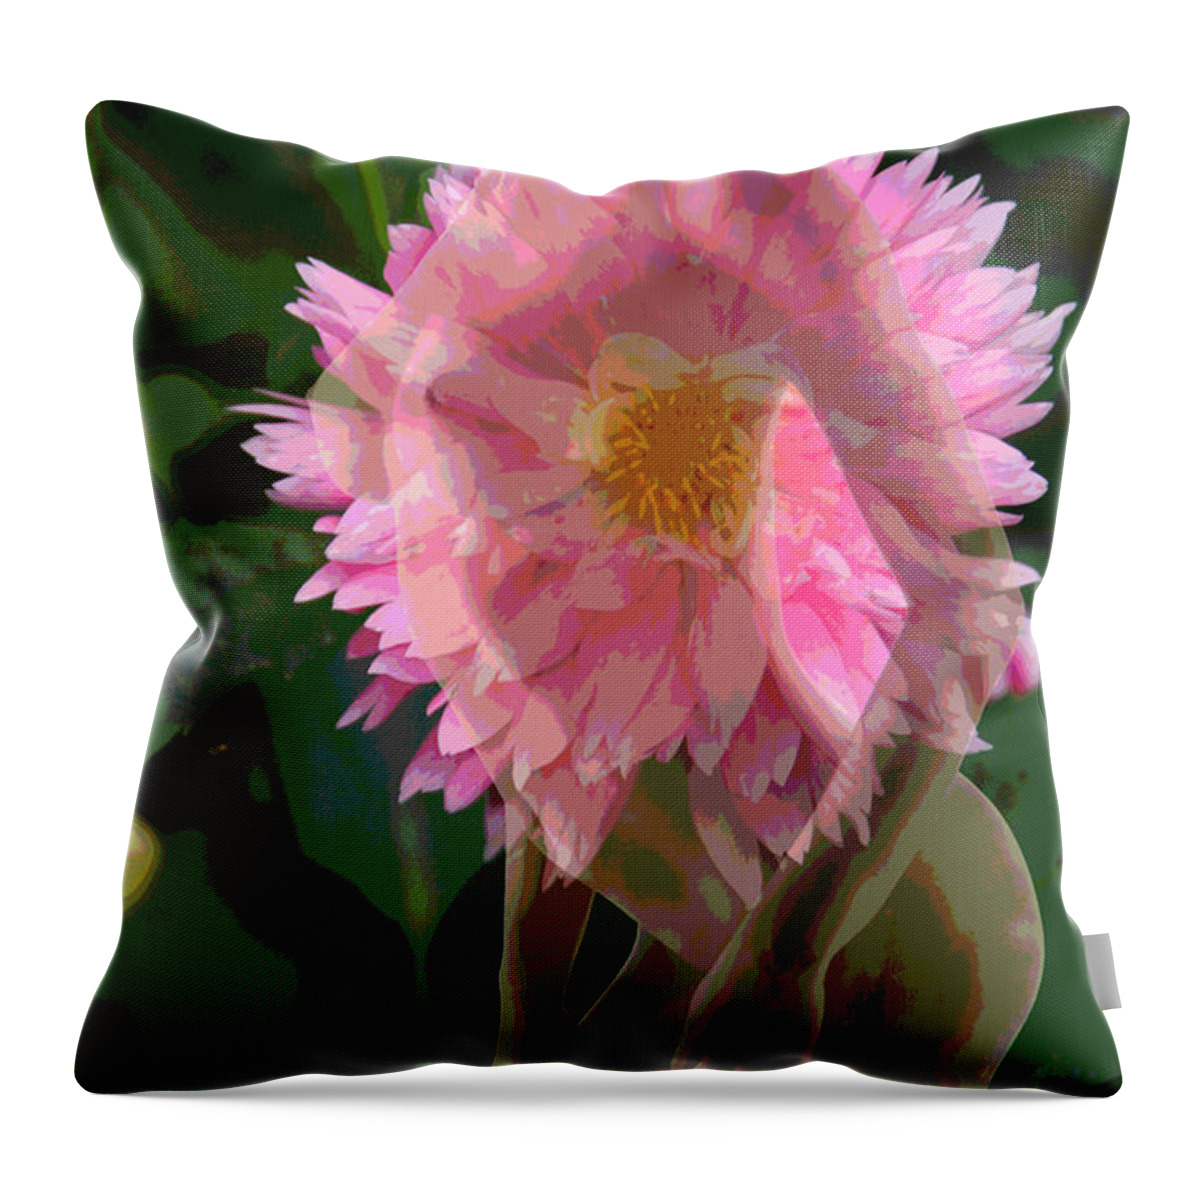 Flower Throw Pillow featuring the digital art African American Flower by Jack Ader